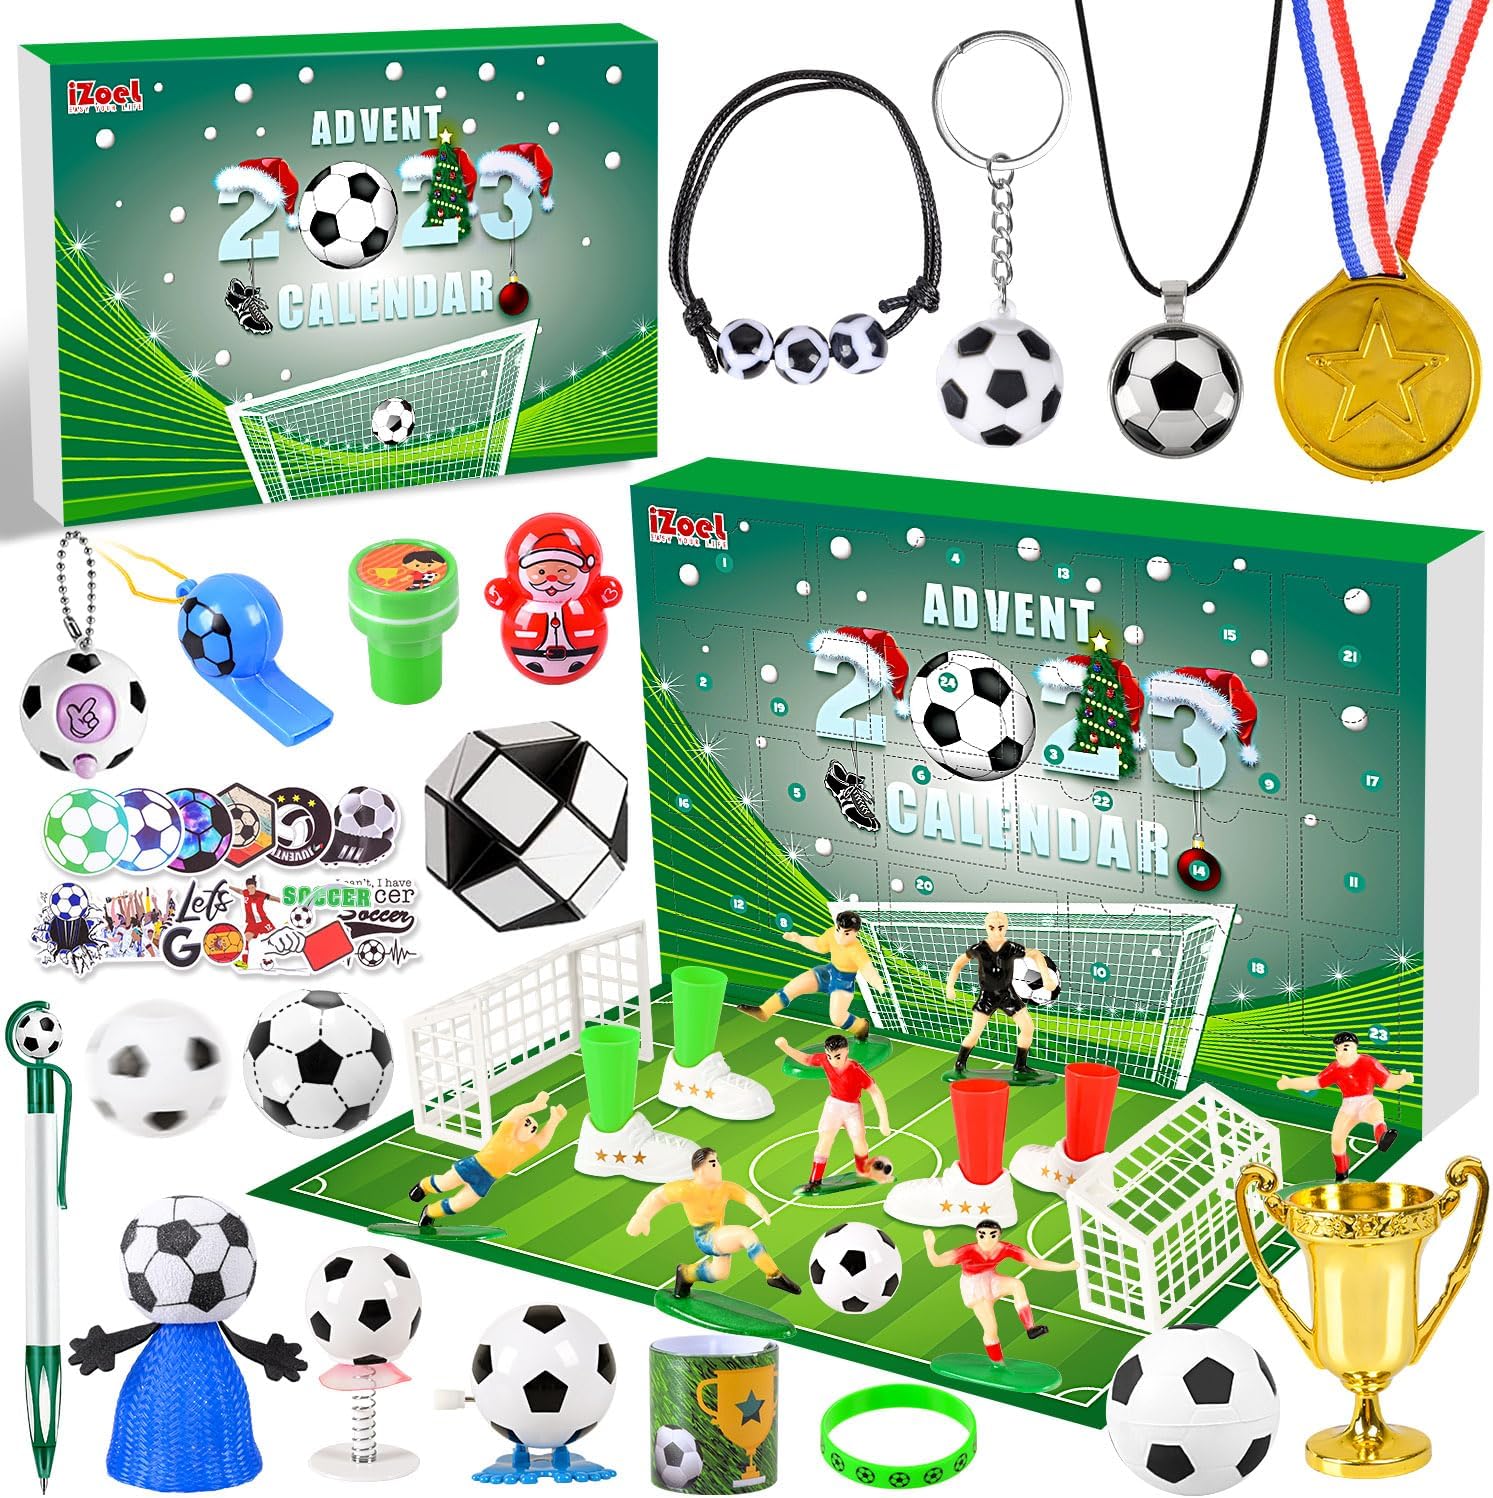 iZoeL Football Advent Calendar for Boys Girls 2023, 2023 World Football Gifts with Football Medal Whistle 24 Christmas Countdown Advent Calendar Christmas Stocking Gifts for Football Fans